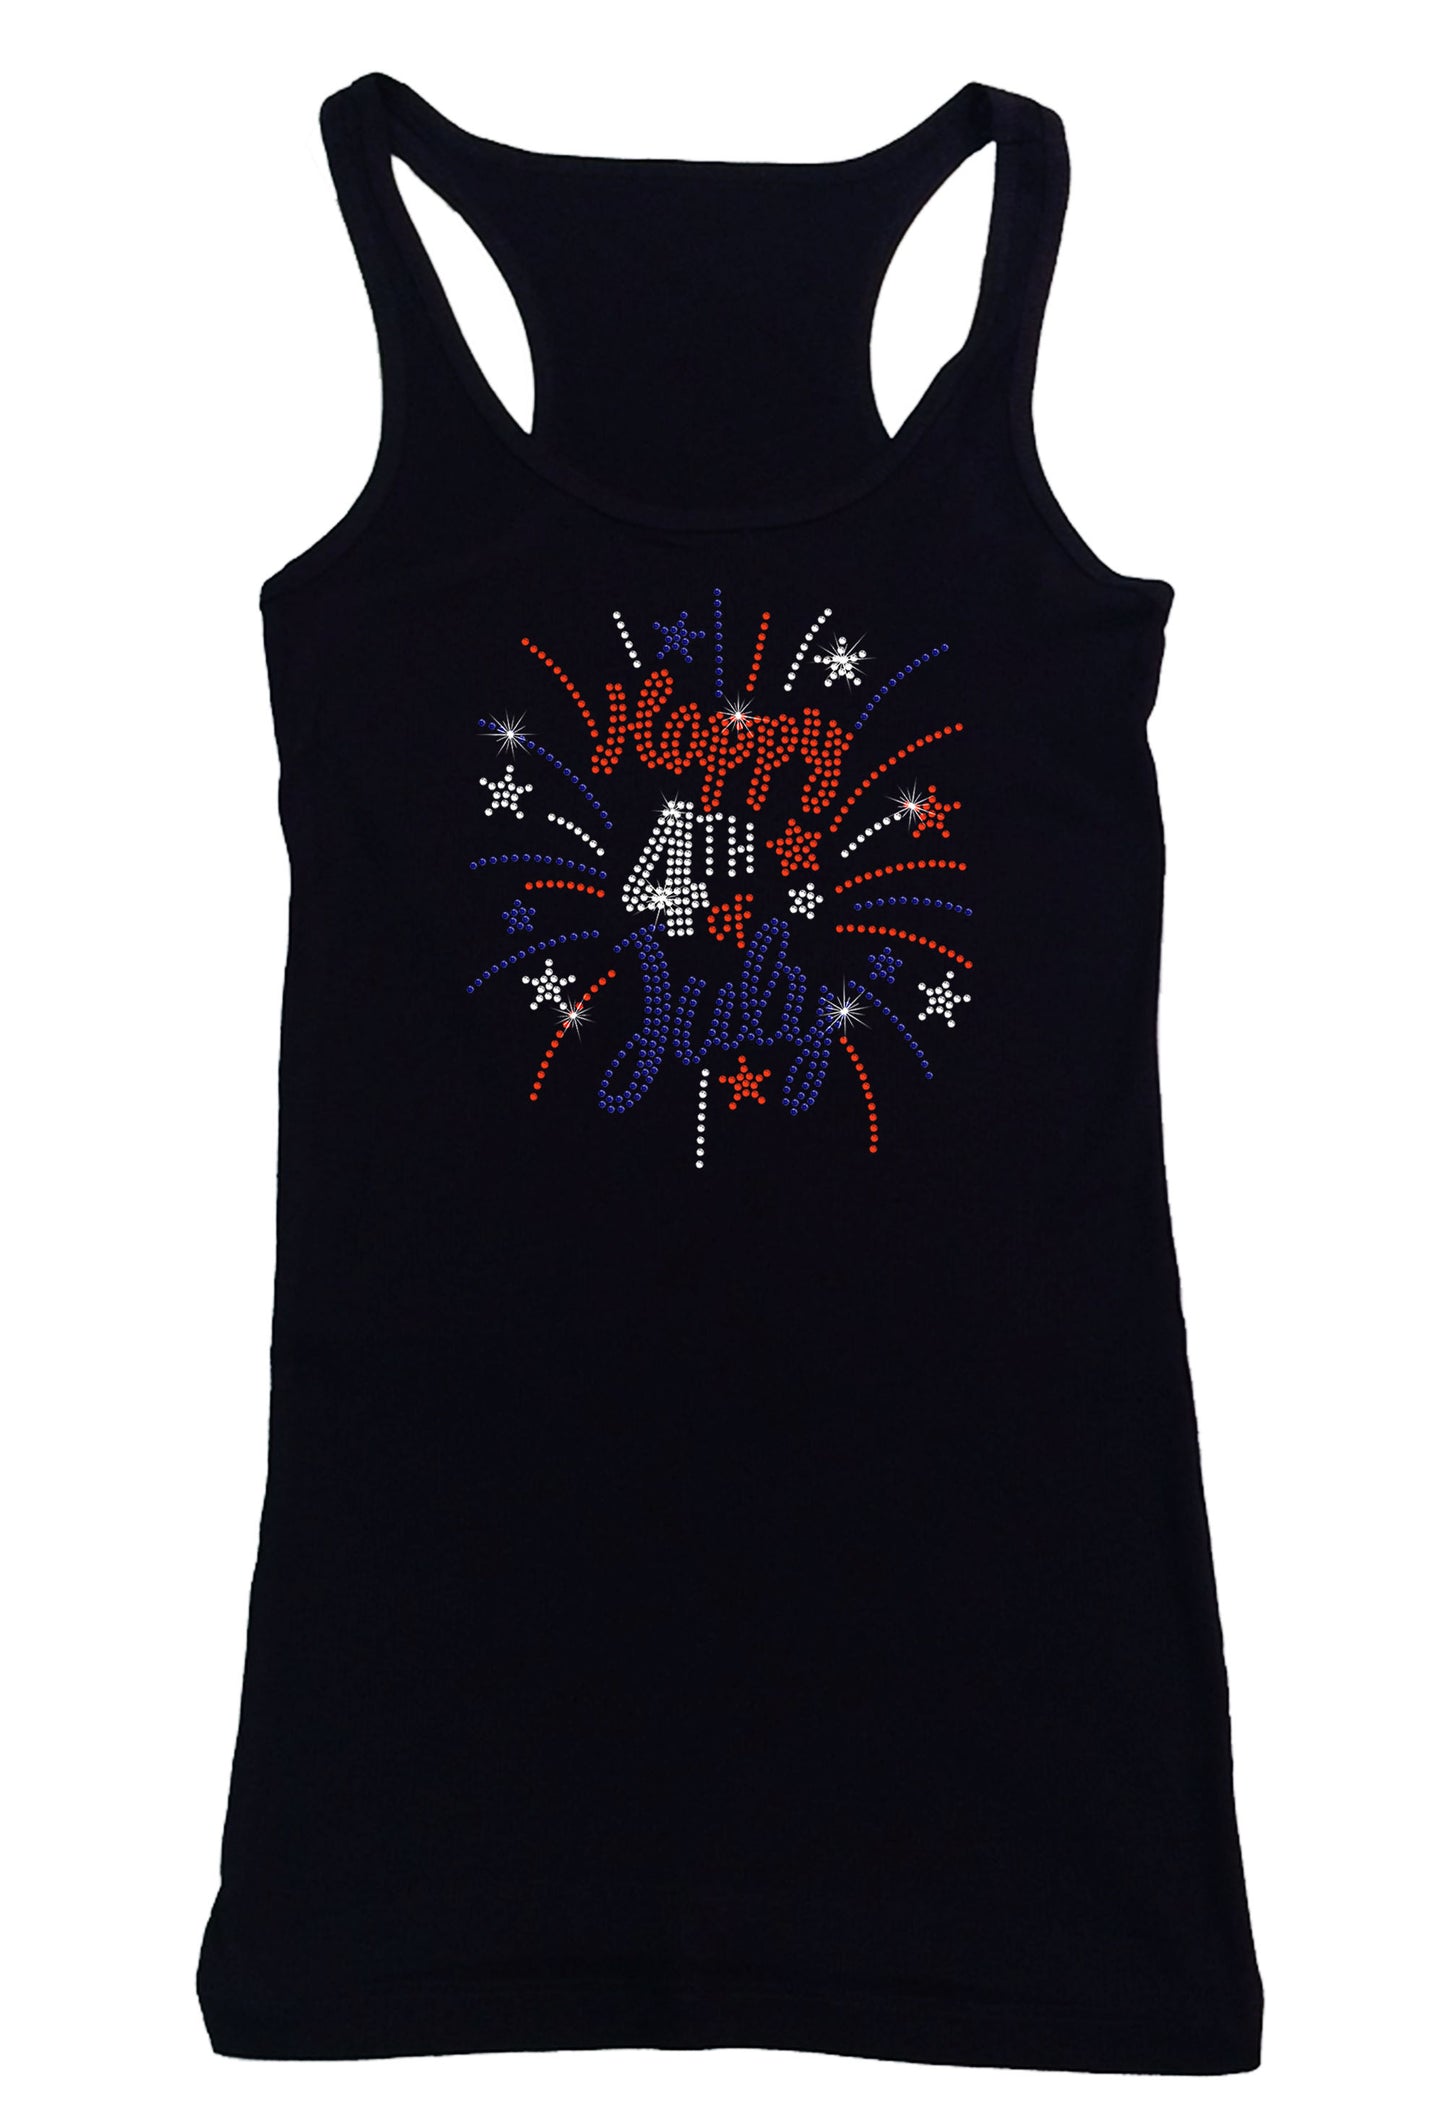 Women's Rhinestone Fitted Tight Snug Happy 4th of July - Firework Burst in Red, White & Blue, Patriotic Shirt, 4th of July Shirt